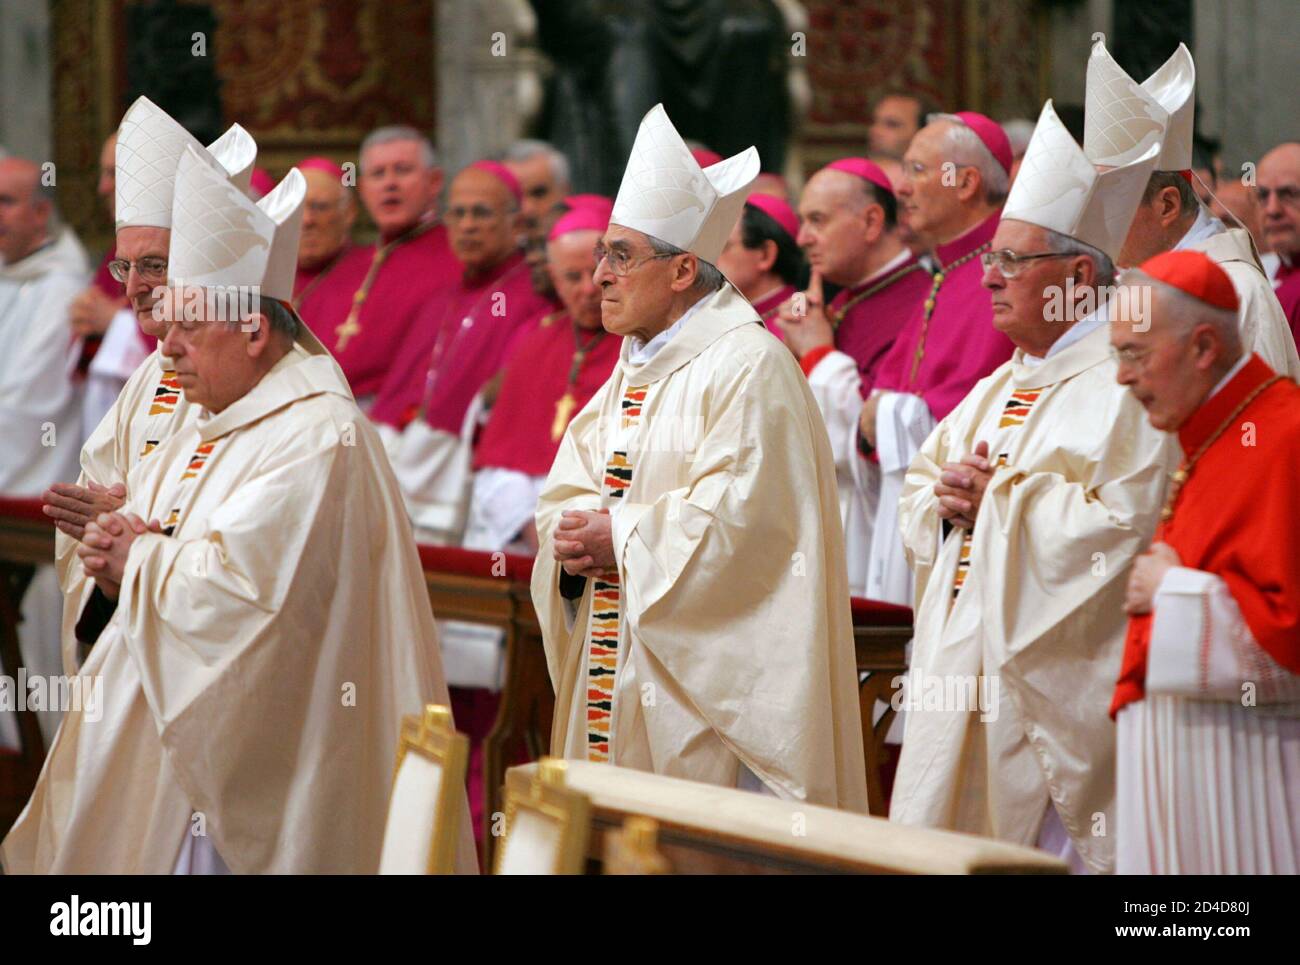 French Cardinal Jean-Marie Lustiger (C) attends a Mass, [presided over by  Chilean Cardinal Jorge Arturo Medina Estevez], in the Vatican's St. Peter's  Basilica April 16, 2005. [Smoke signals above the Sistine Chapel,